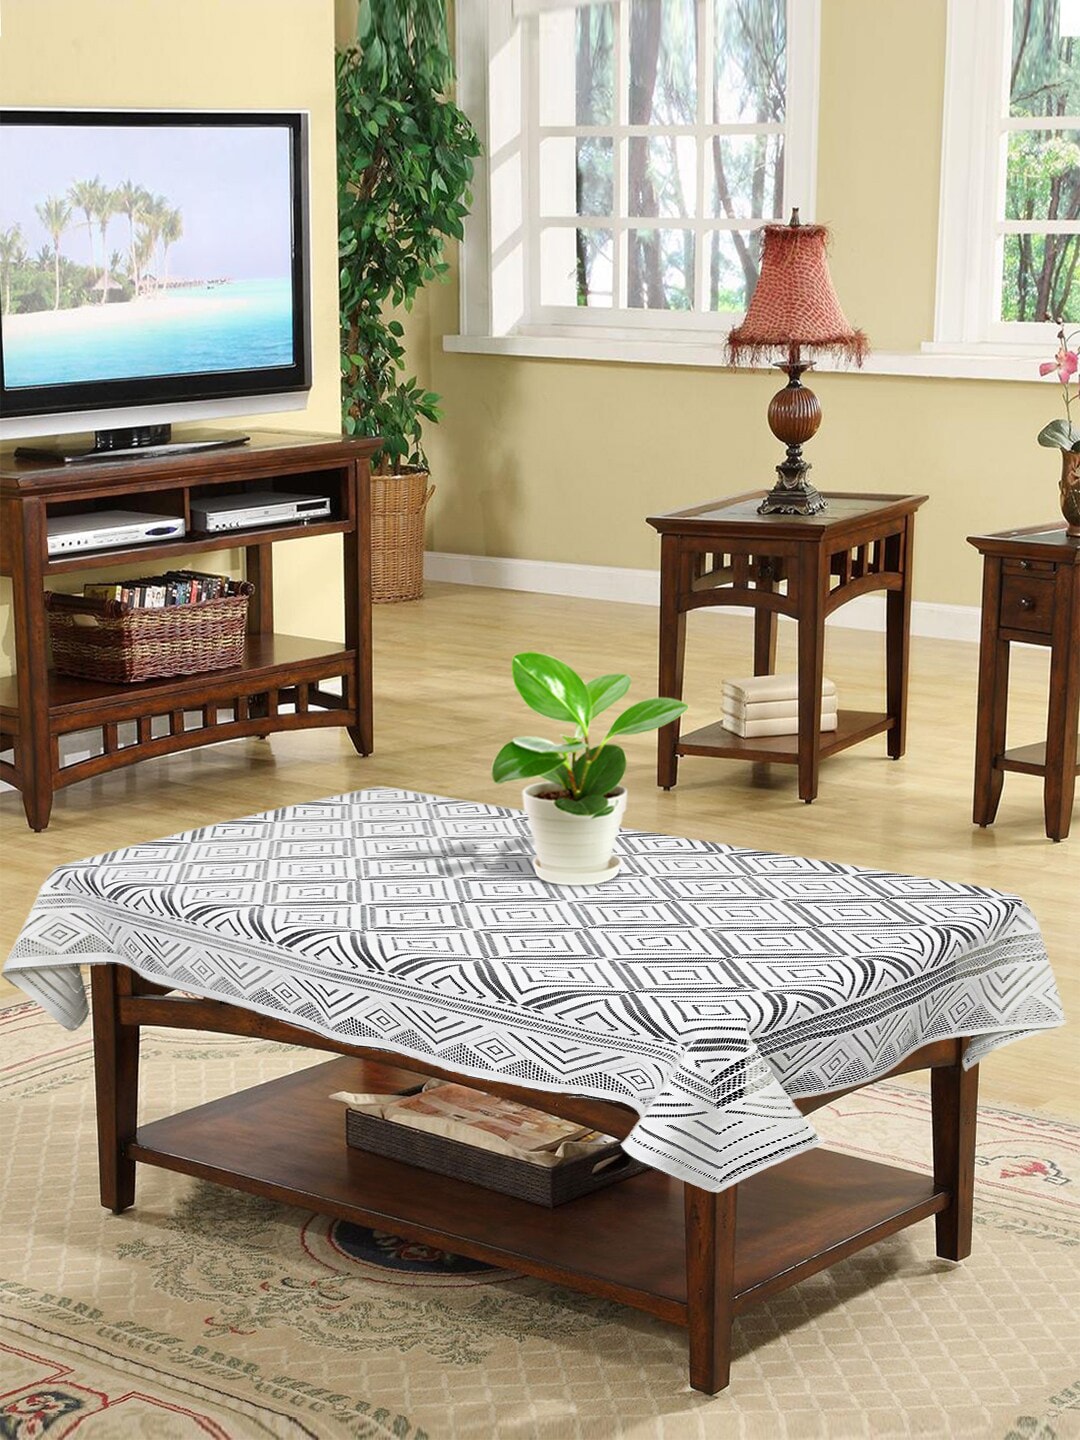 Kuber Industries White Printed 4 Seater Cotton Table Cover Price in India